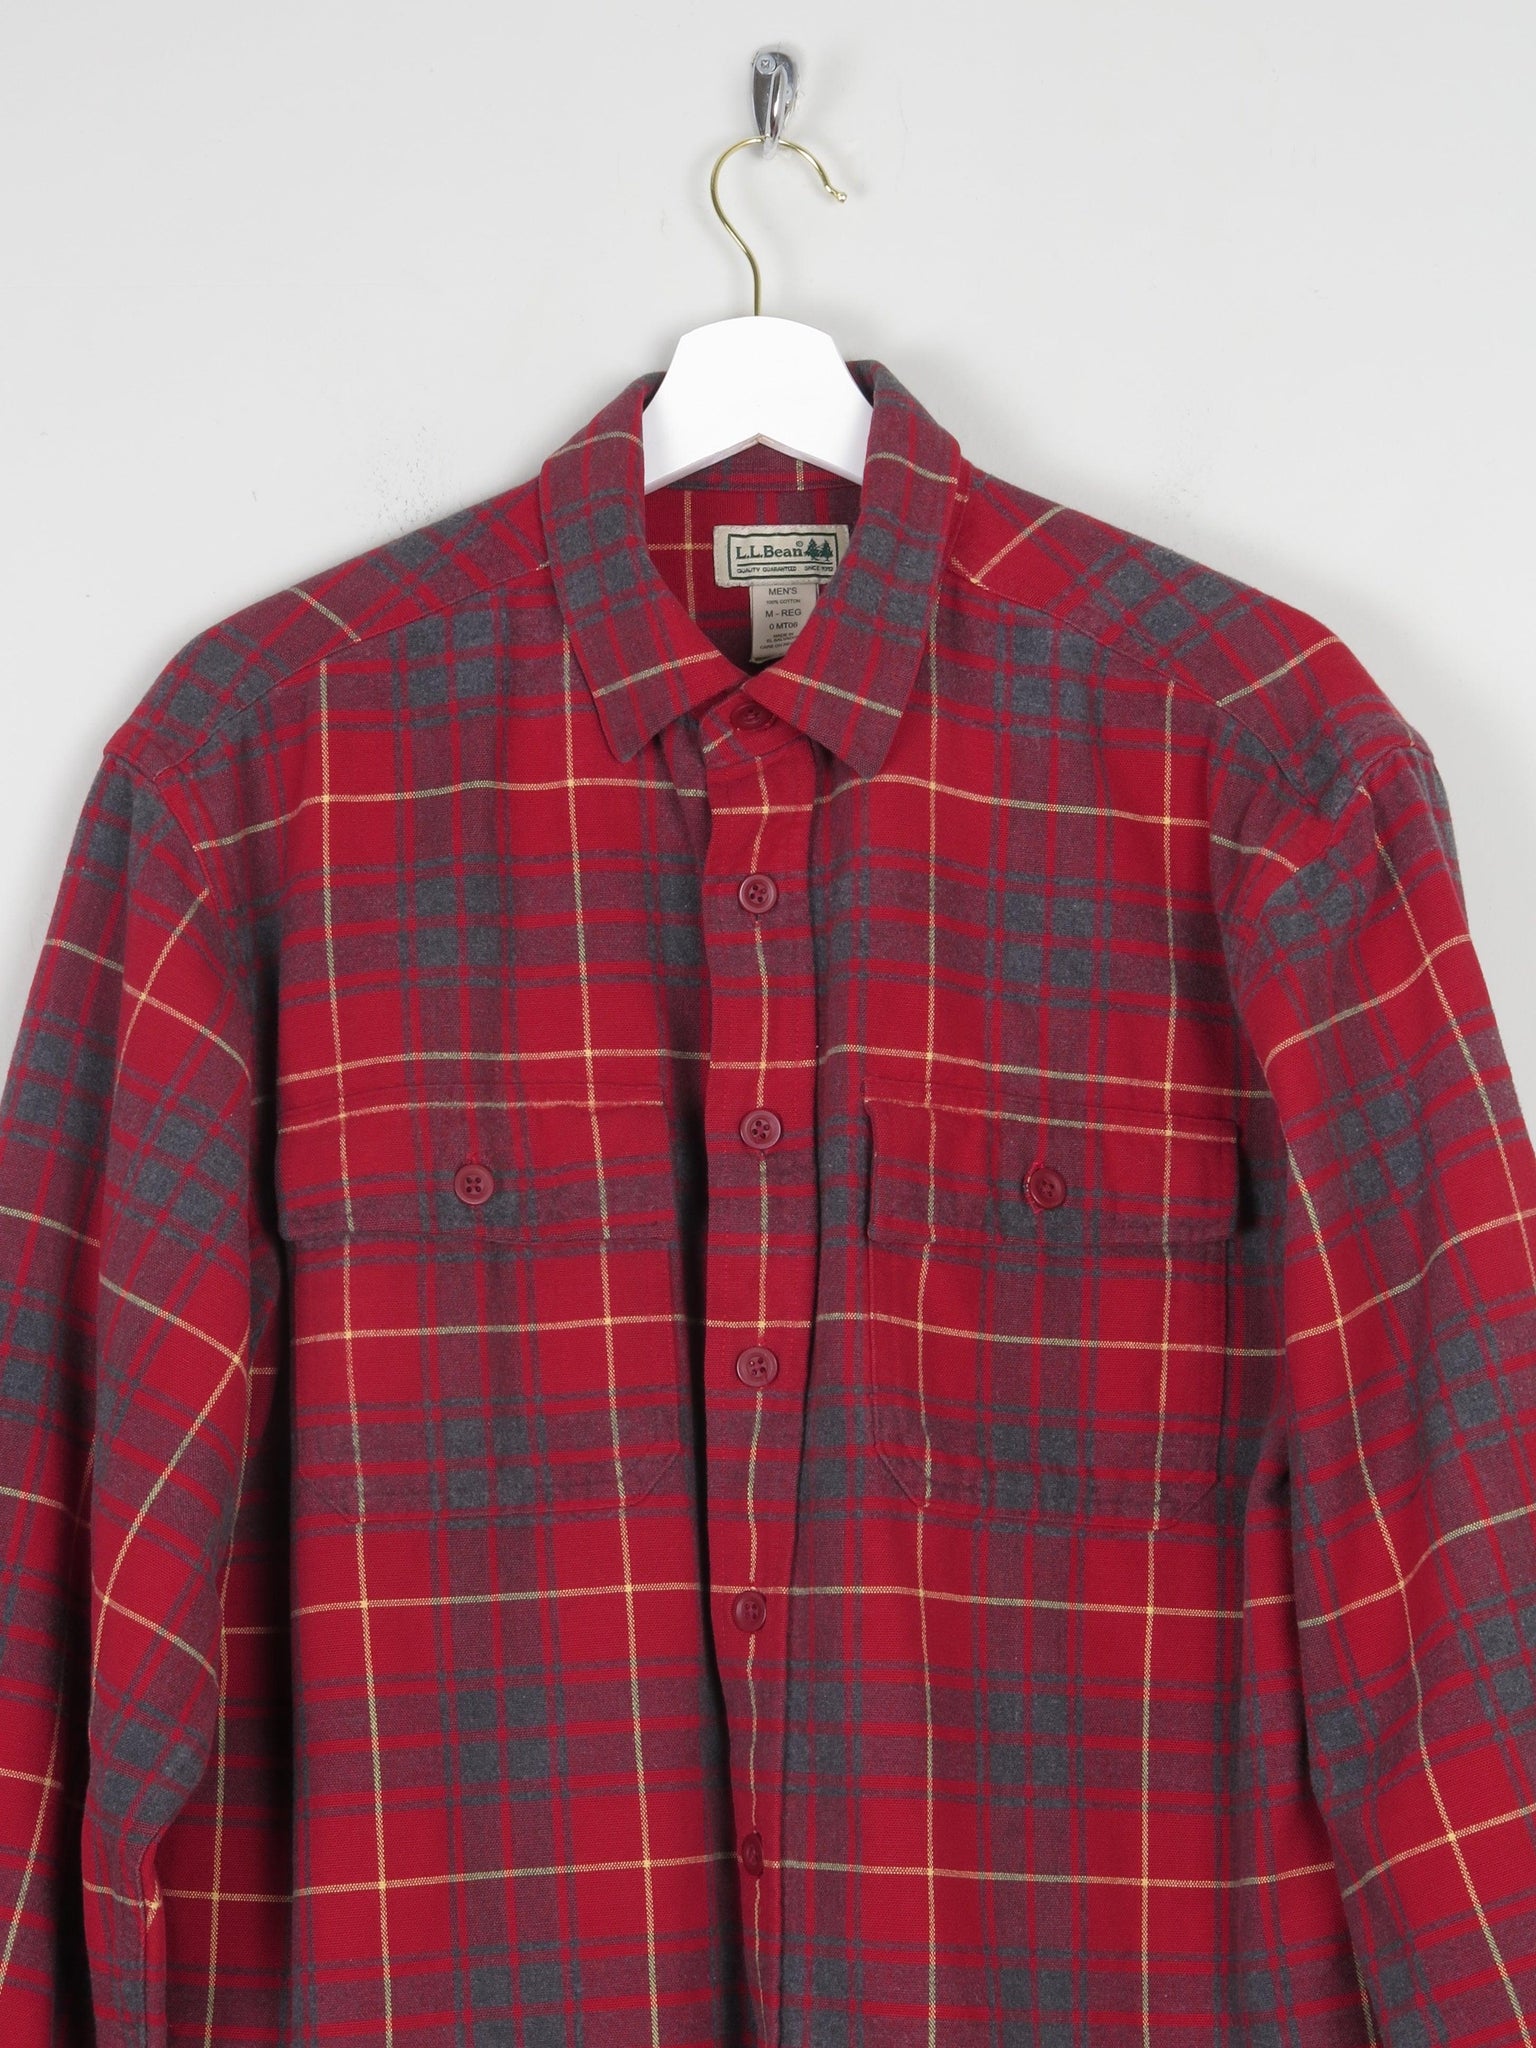 Men's Red Check Heavy Flannel LLBean Shirt M - The Harlequin